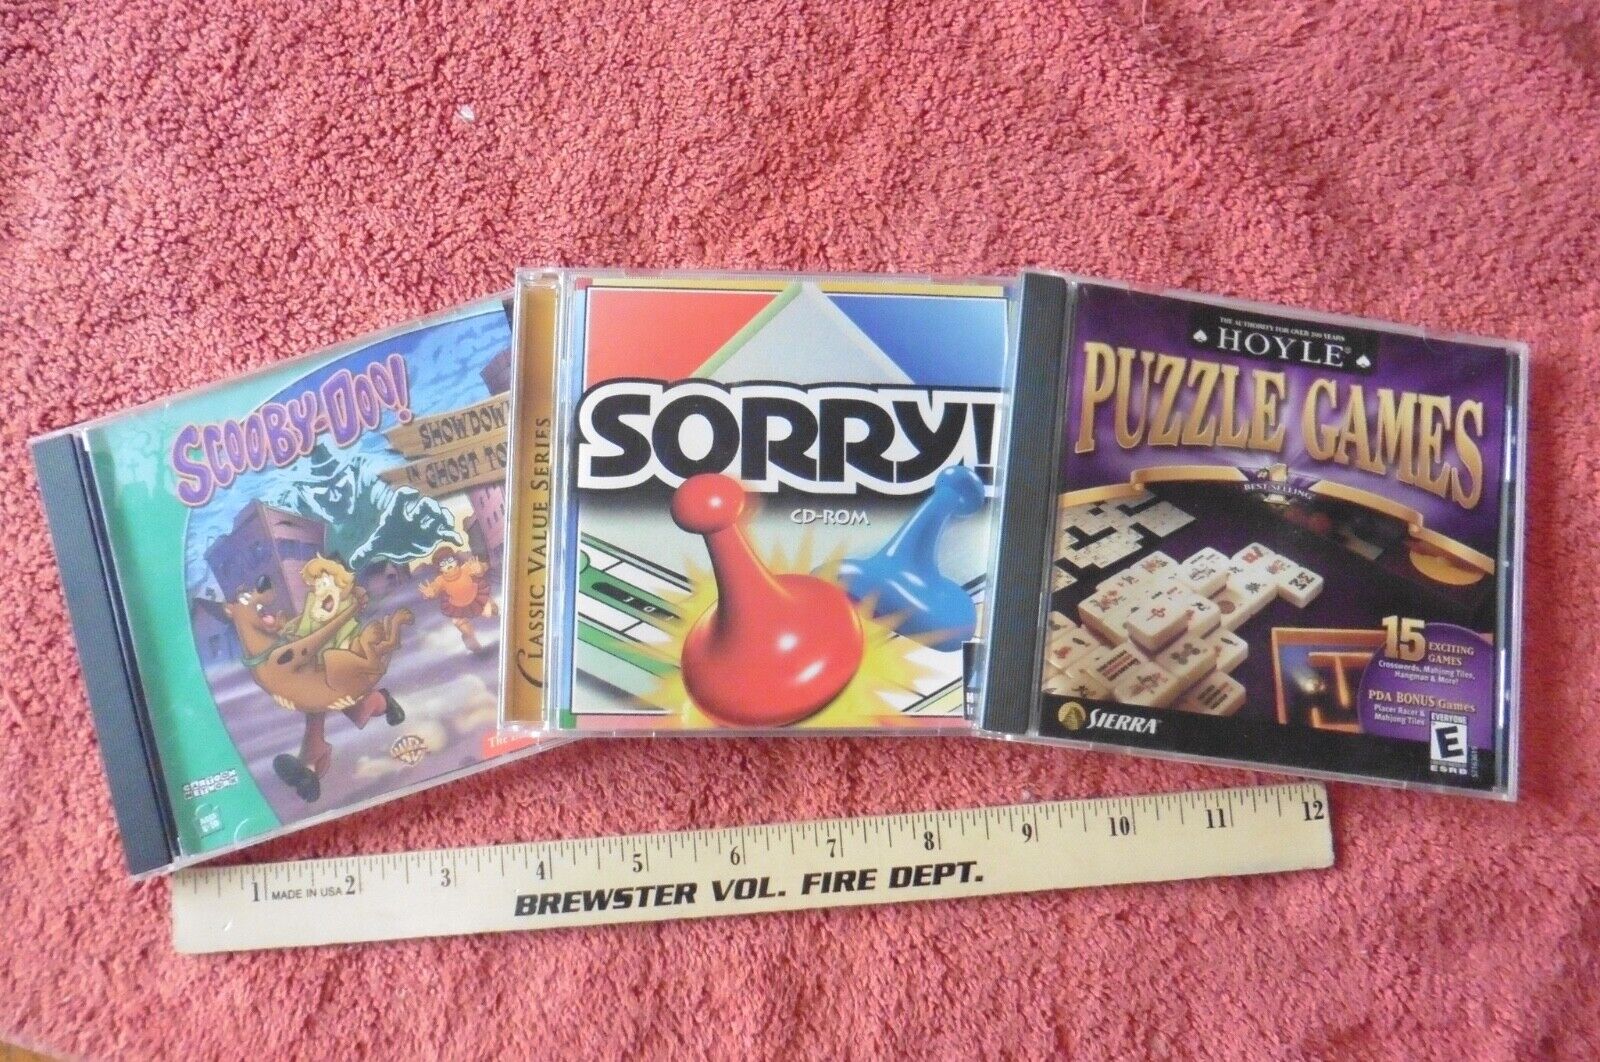 Lot of 3 Vintage CD-ROM Scooby-Doo Showdown in Ghost Town Sorry & Puzzle Games